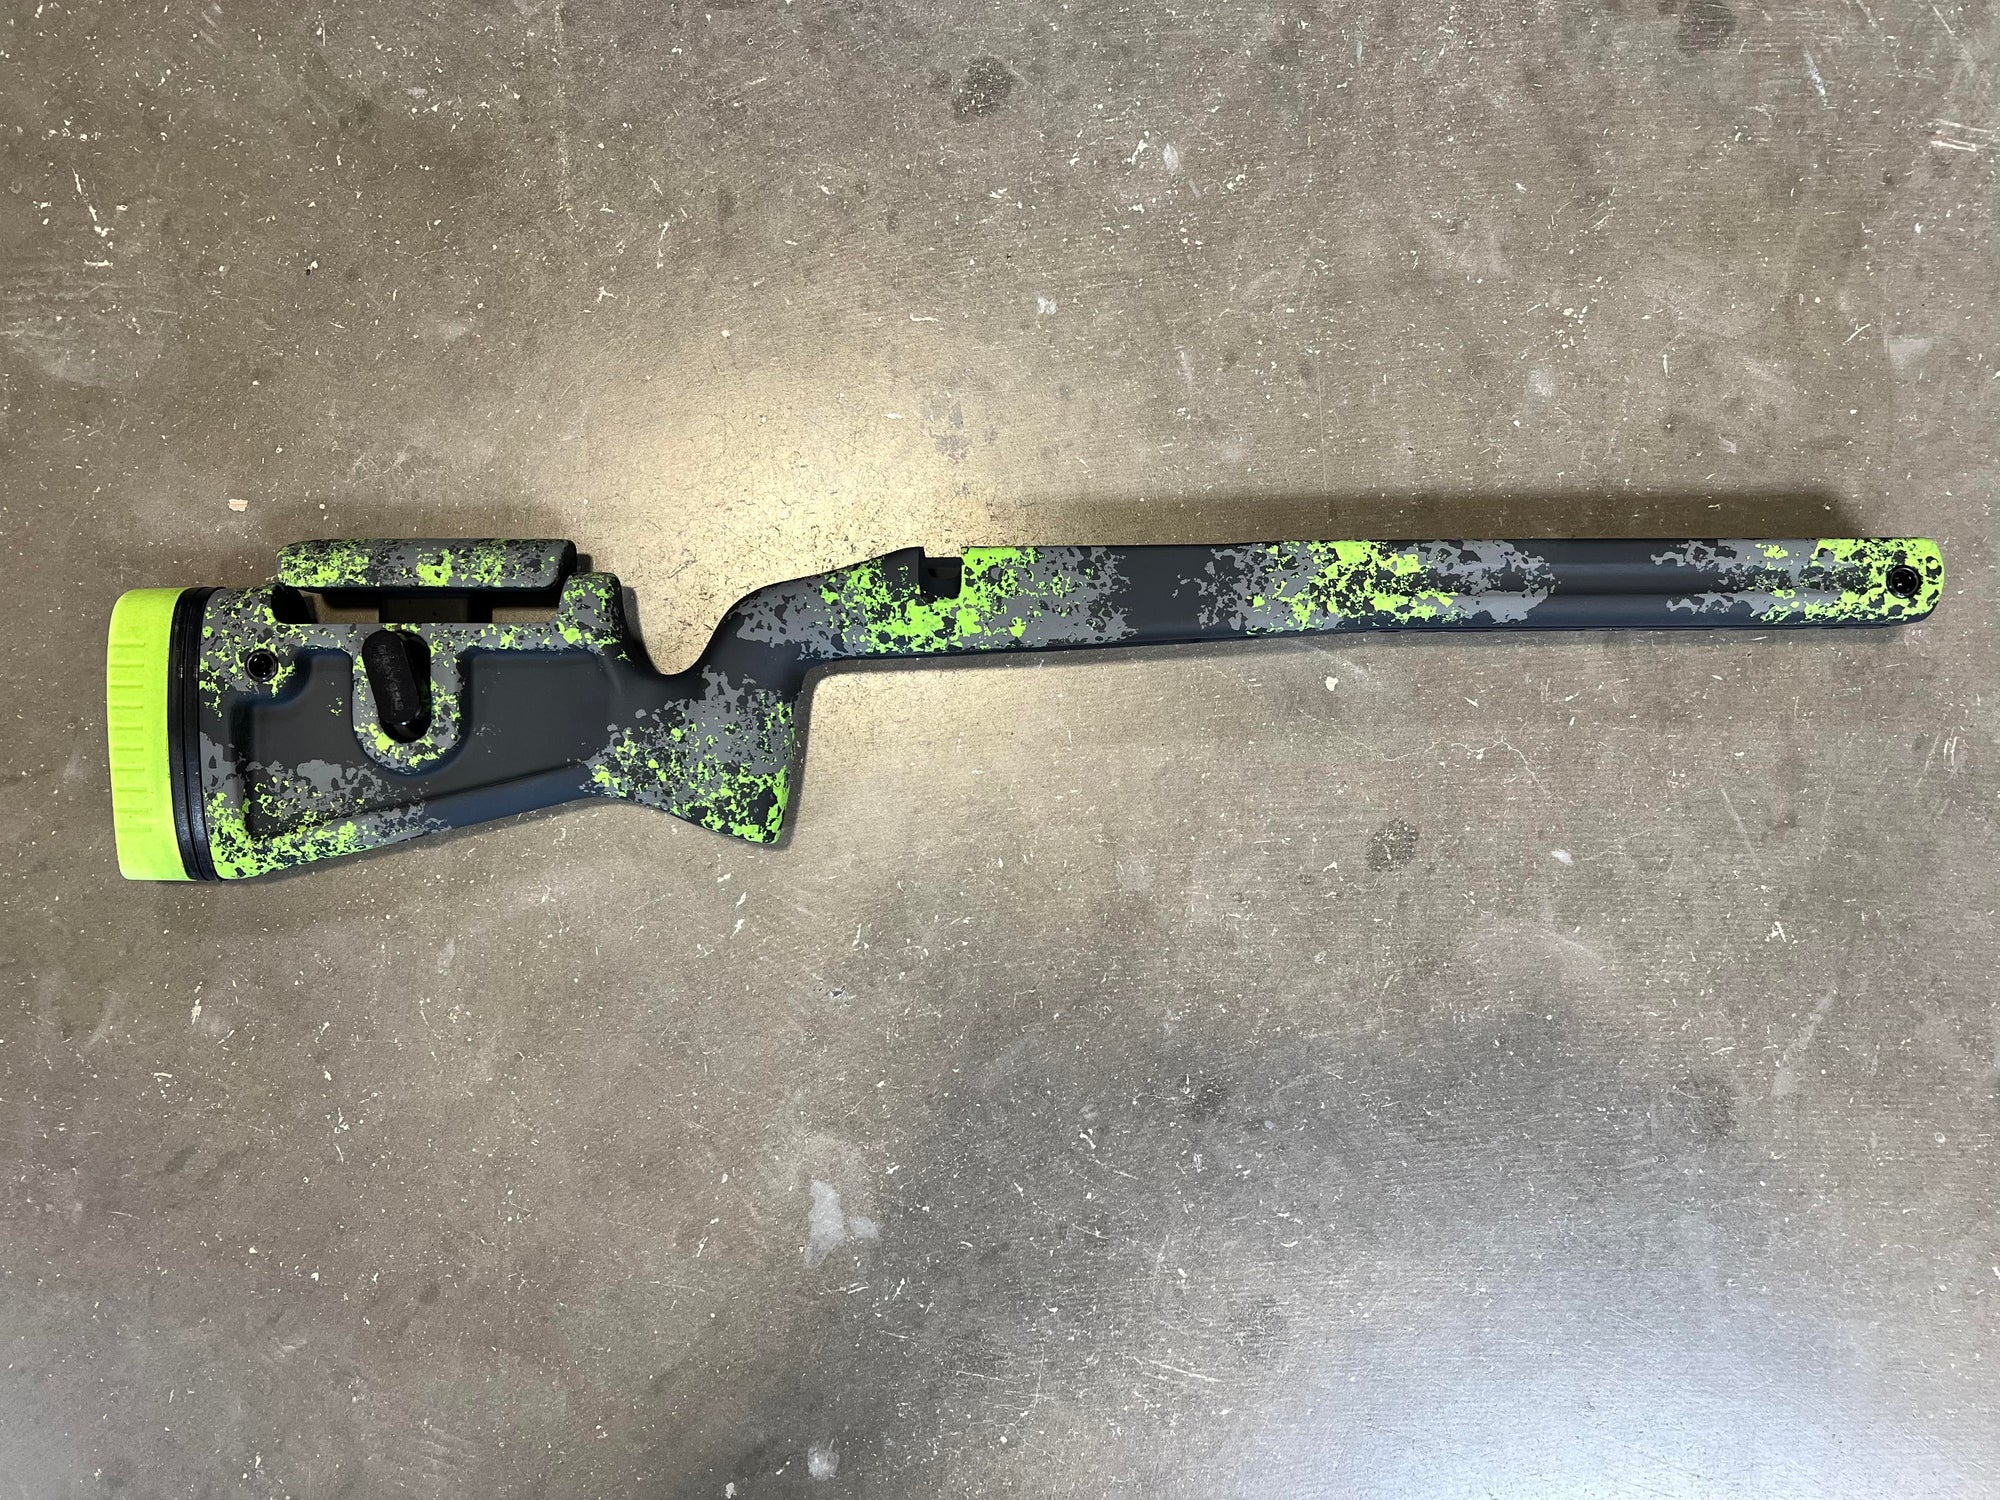 Phoenix 2 - Right Hand Rem 700 or 700 clone short action, M5, Fits any barrel.  Painted Zombie Green Camo w/ Zombie Green G Lite Recoil Pad